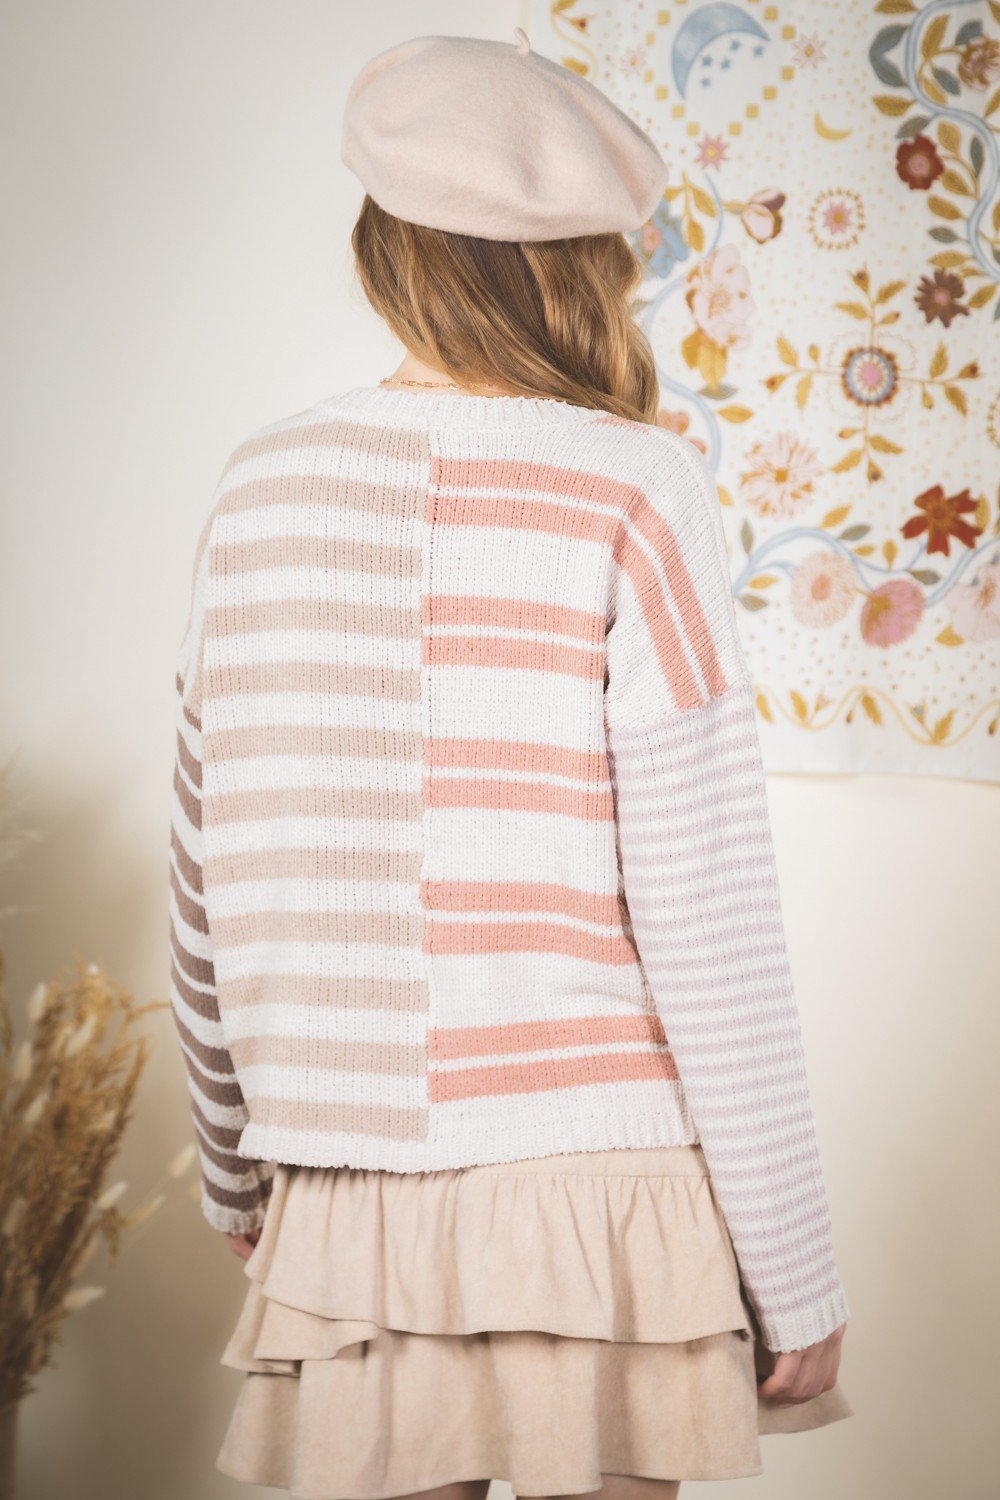 Out Of Line Sweater - Cream